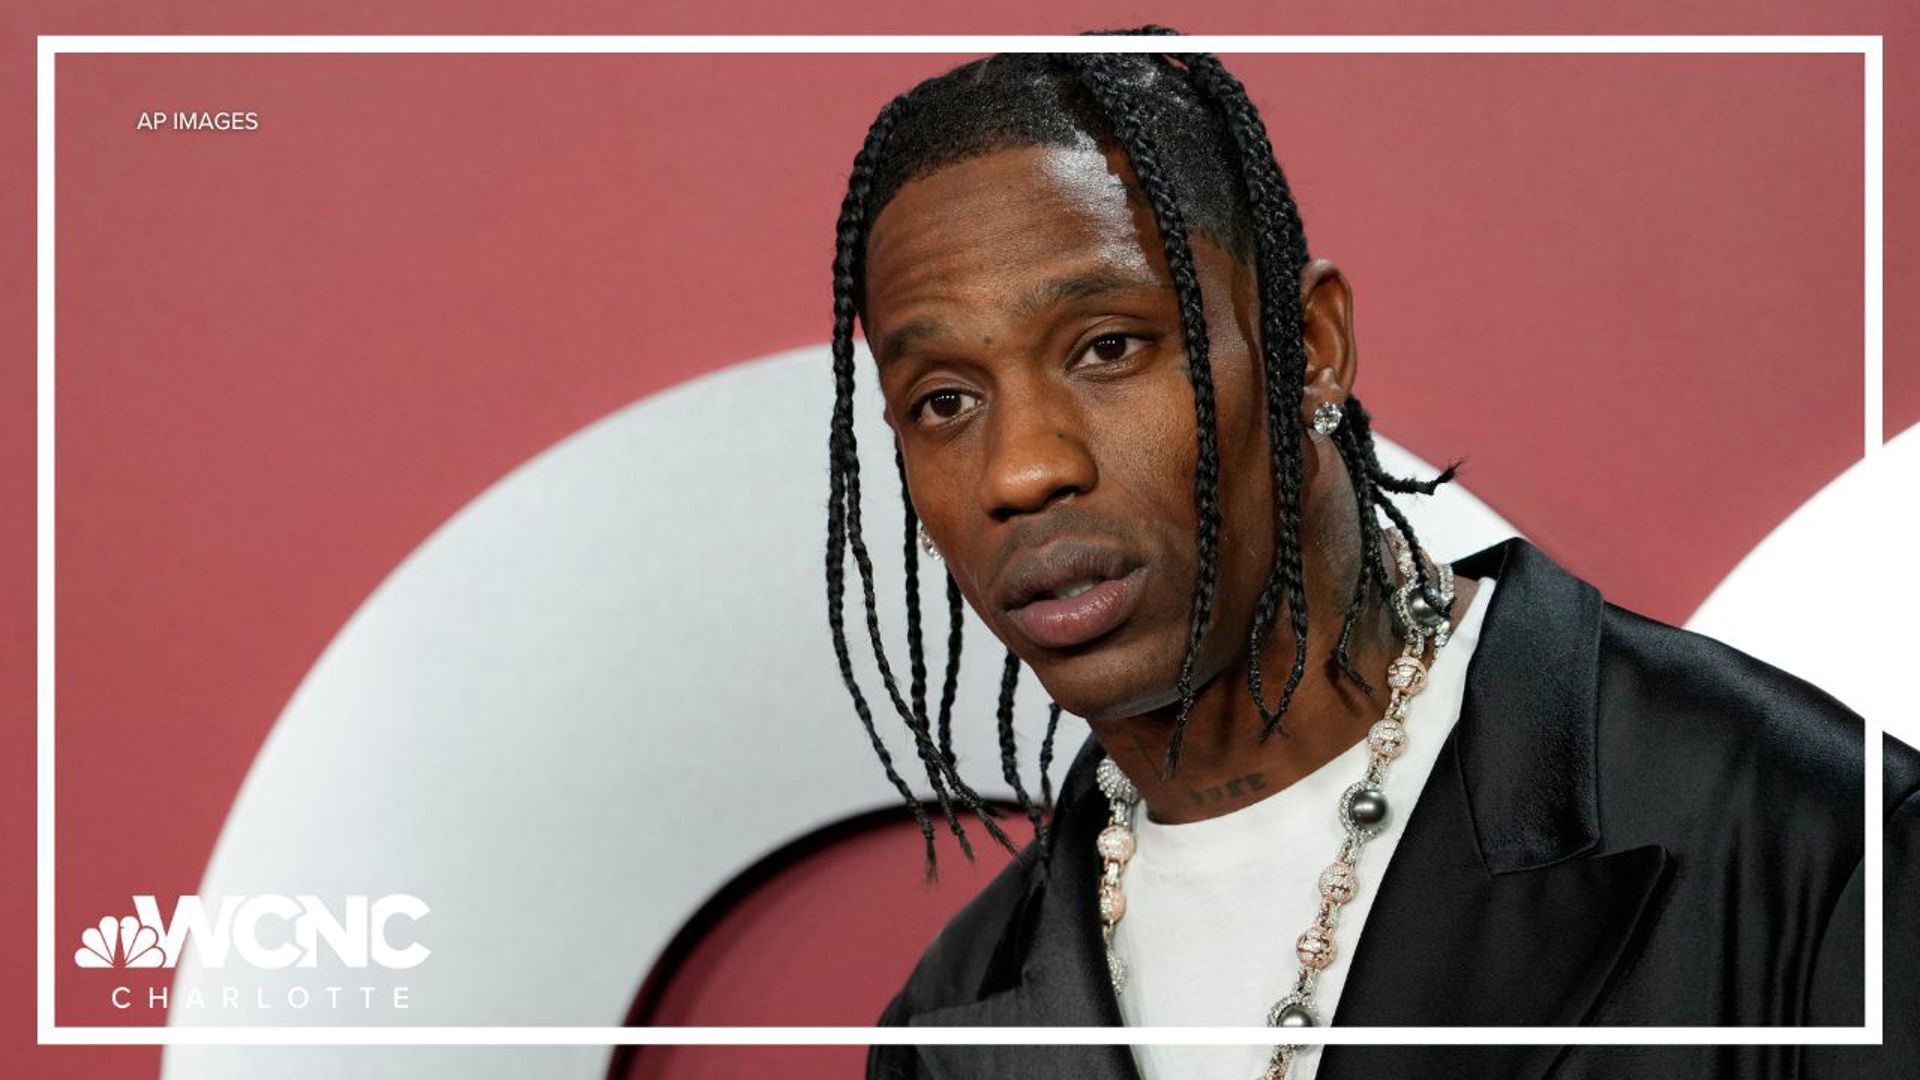 Rapper Travis Scott arrested in Miami Beach. Scott is charged with trespassing and disorderly intoxication.